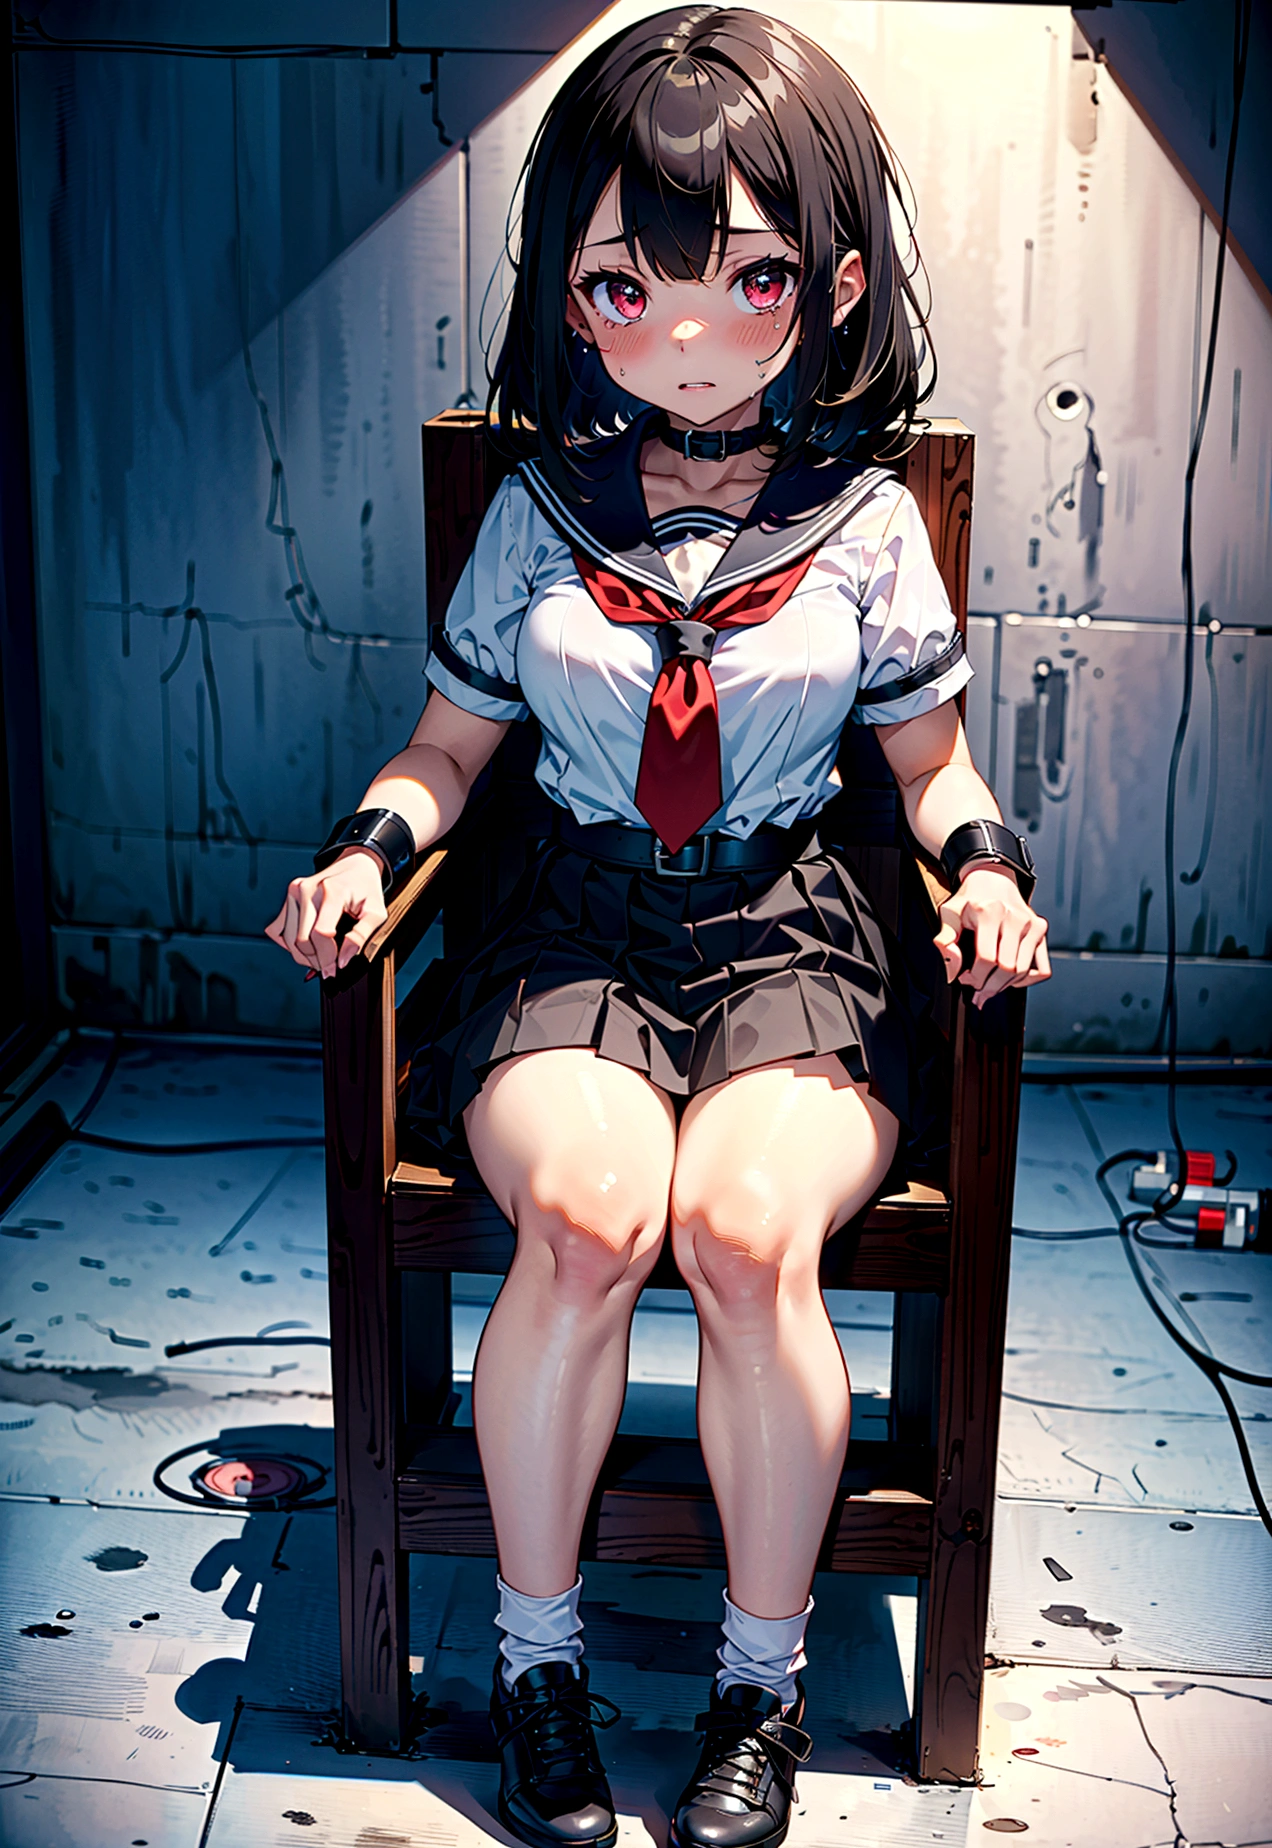 1 girl, (blushing, terrified, crying), tied to a chair, straped to chair, (short sleeve, mini-skirt, sailor uniform), (inside basement, underground), (wrist cuffs, ankle cuffs, wrists tied, ankles tied), perfect body, detailed face, detailed eyes, full body, image taken from afar